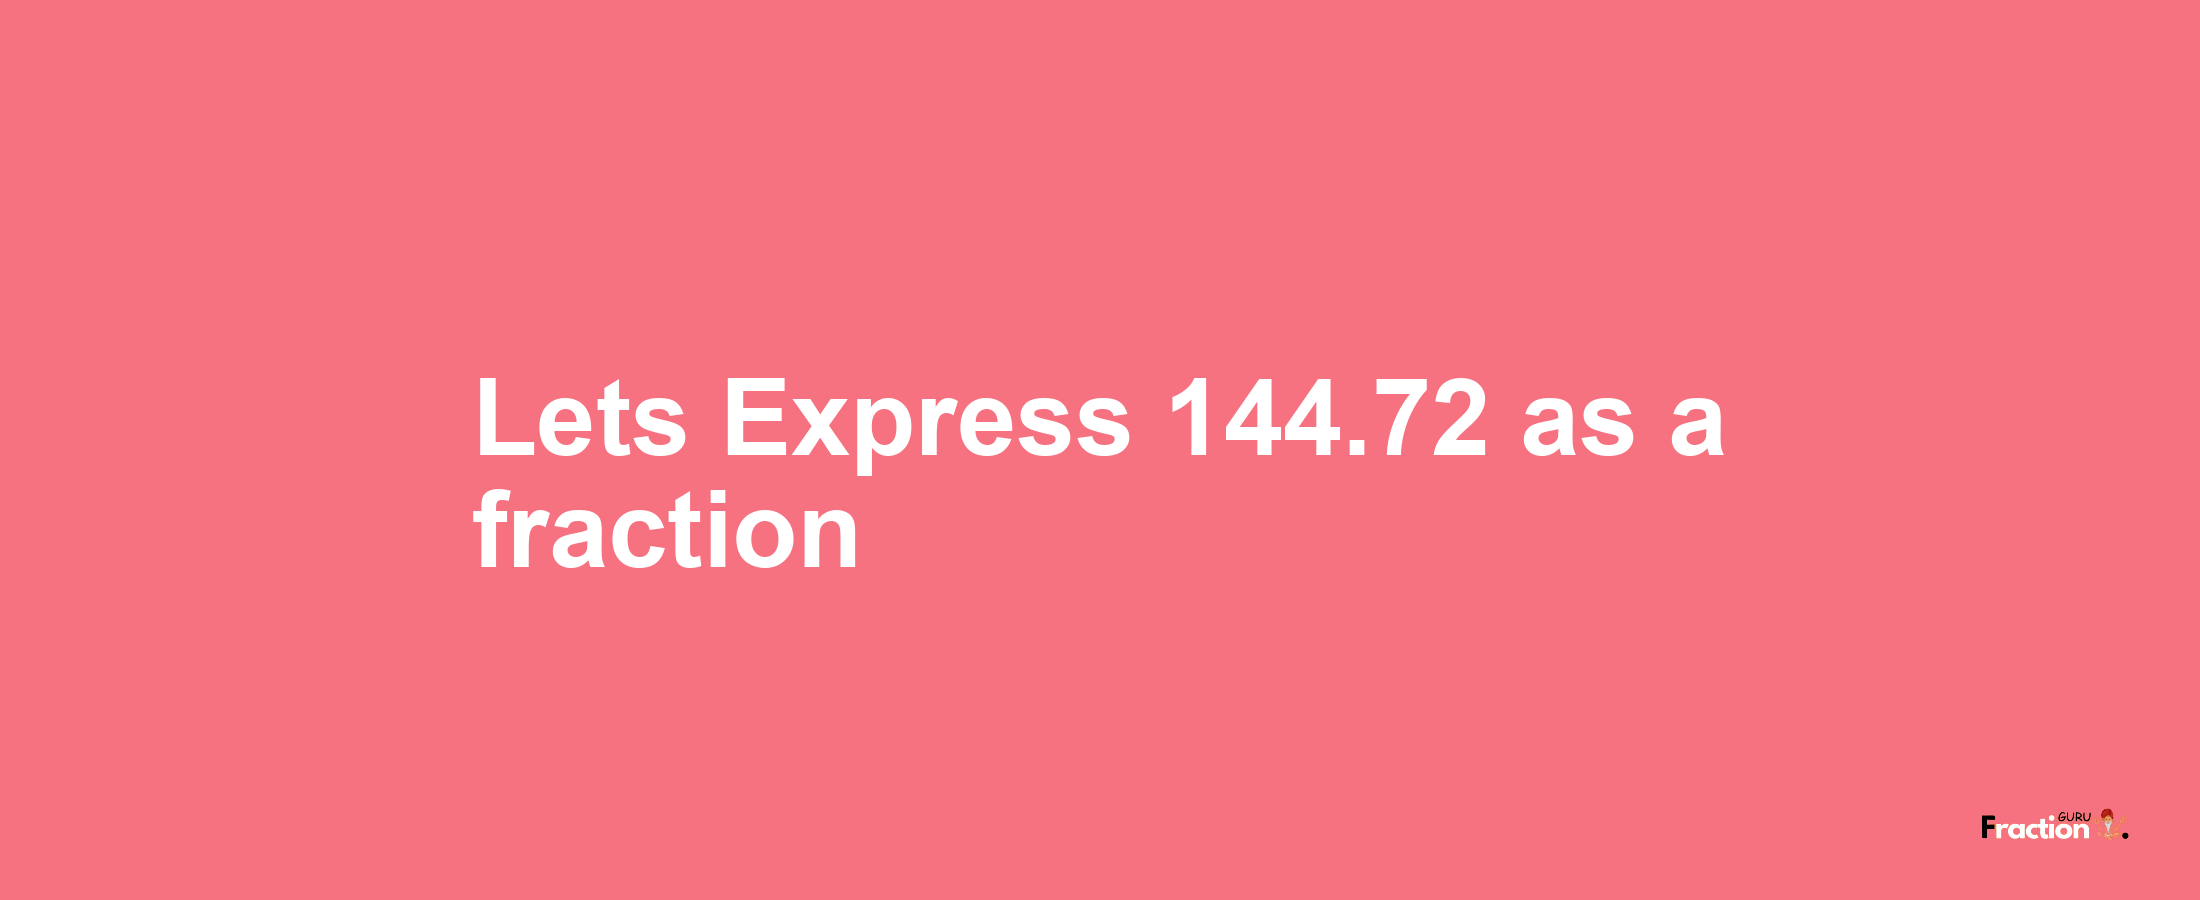 Lets Express 144.72 as afraction